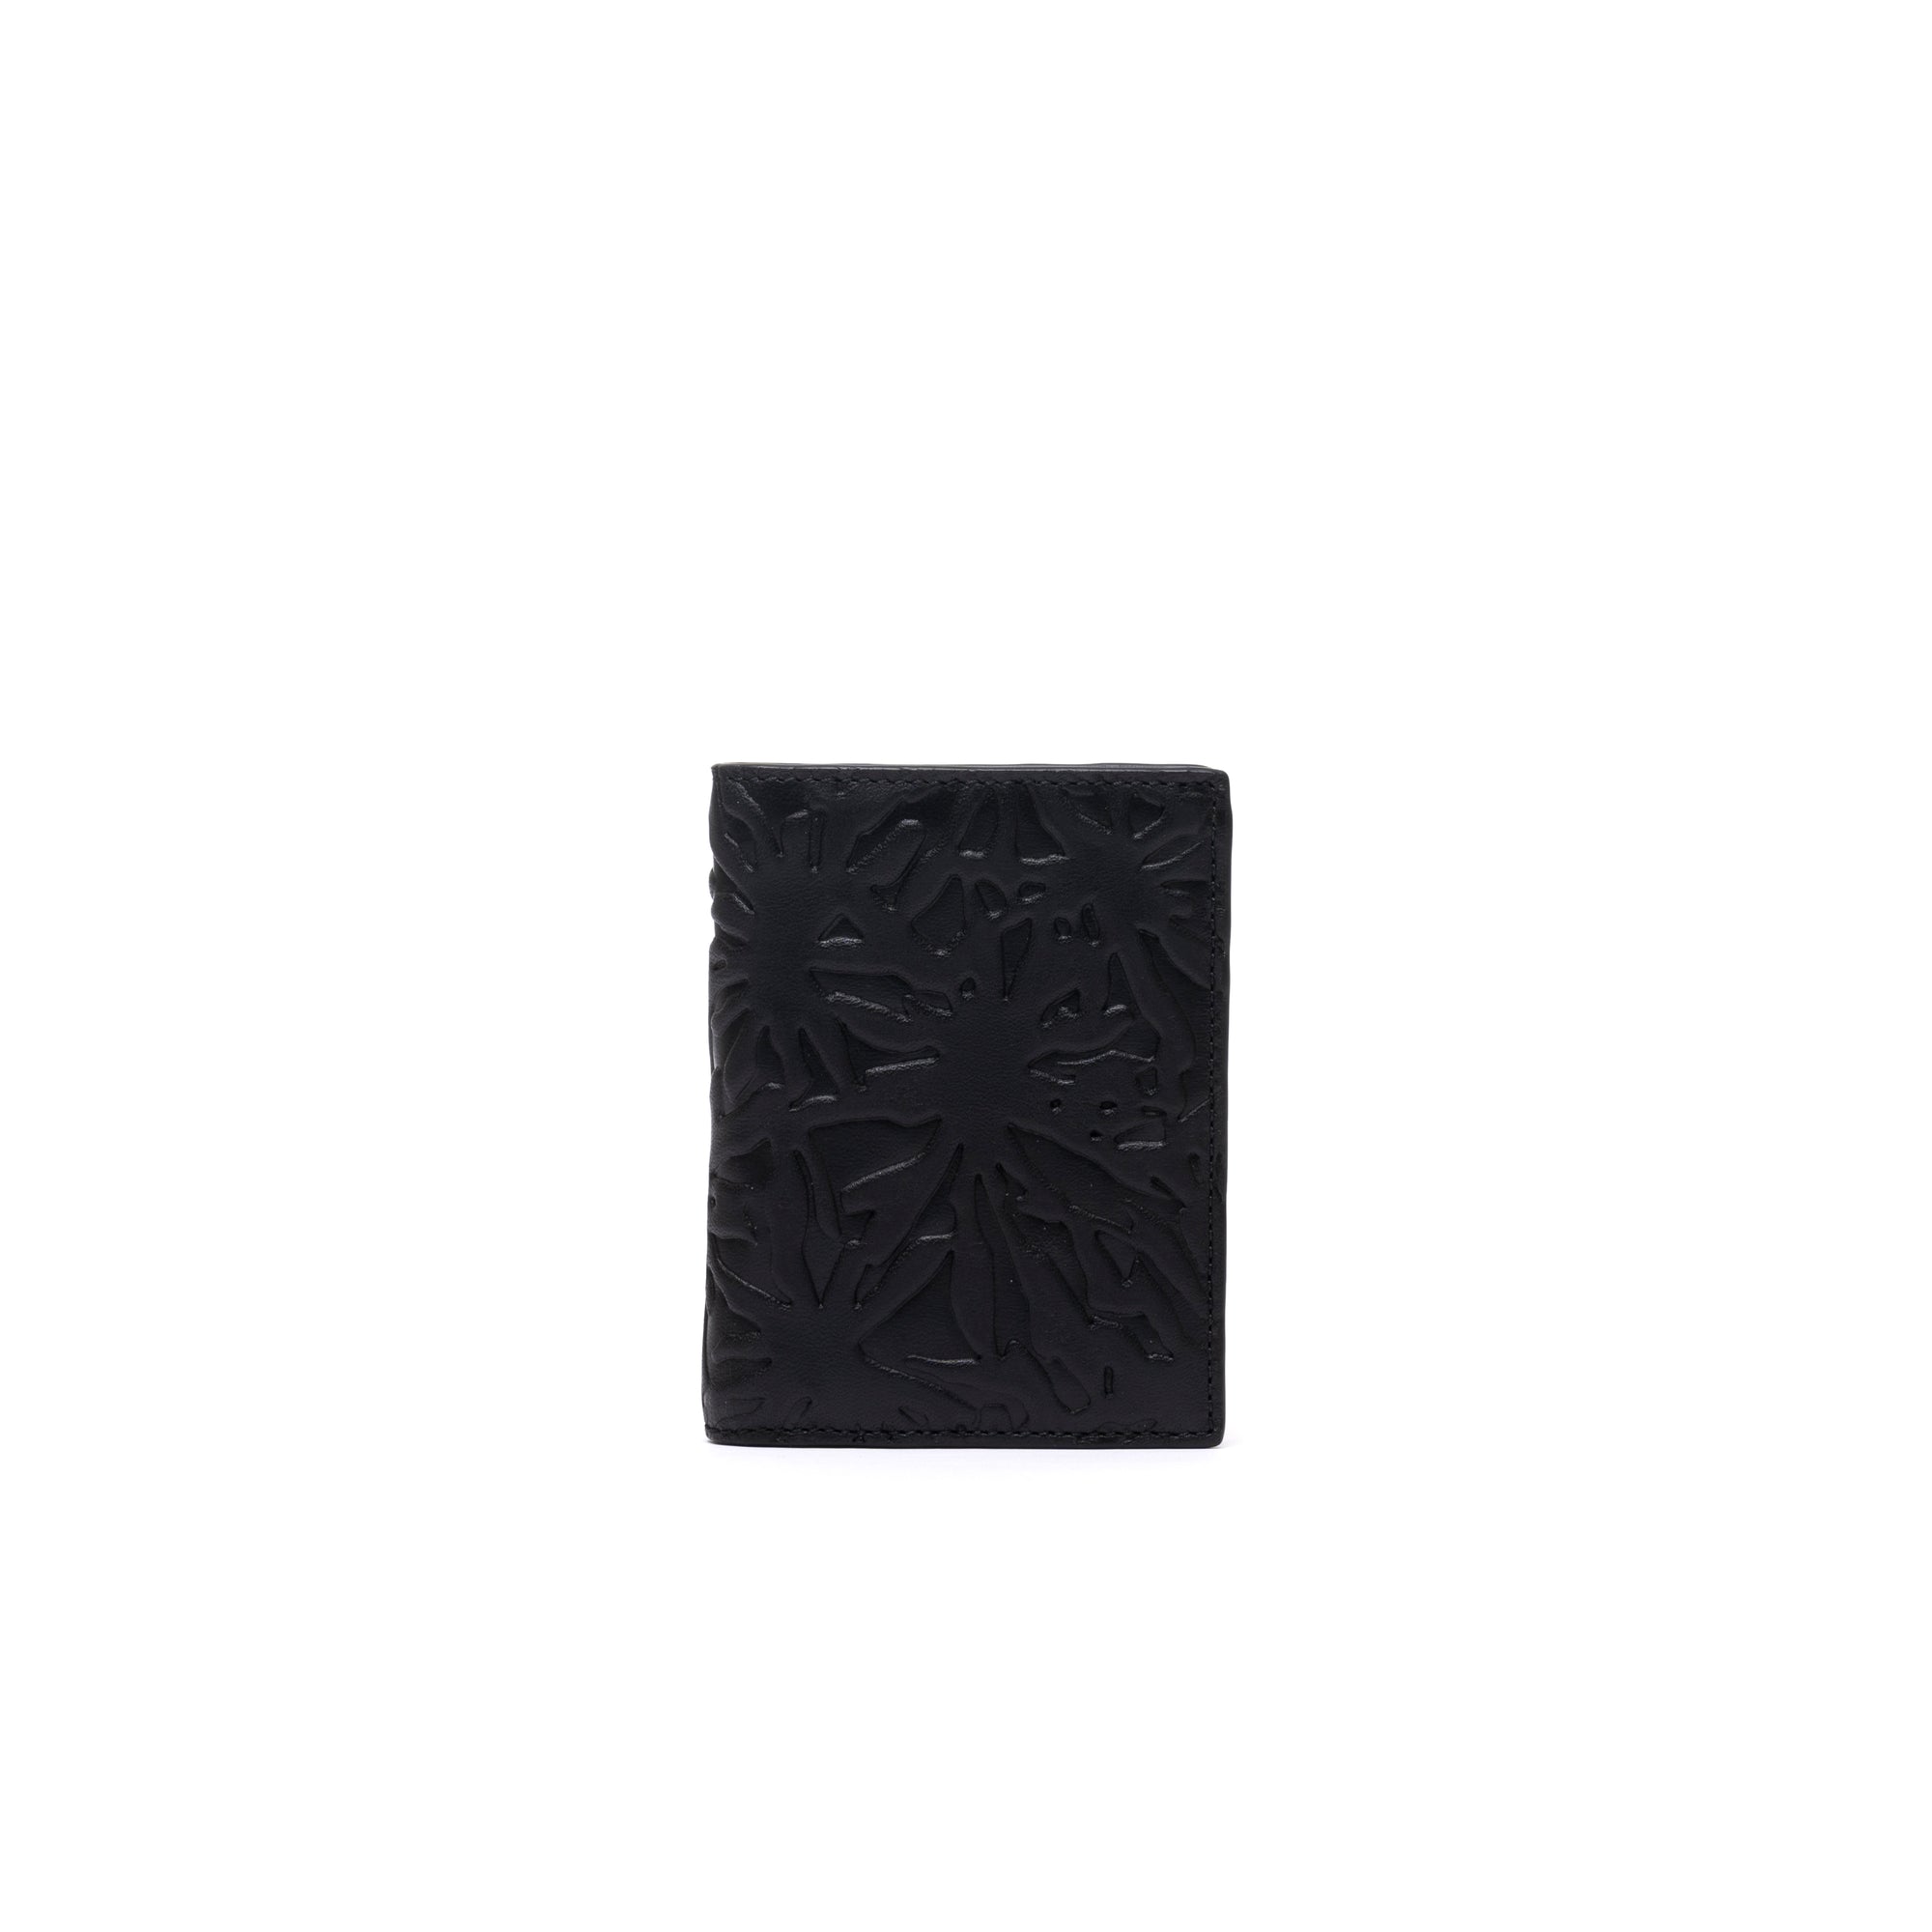 CDG WALLET - Embossed Forest (SA0641 Black) view 1